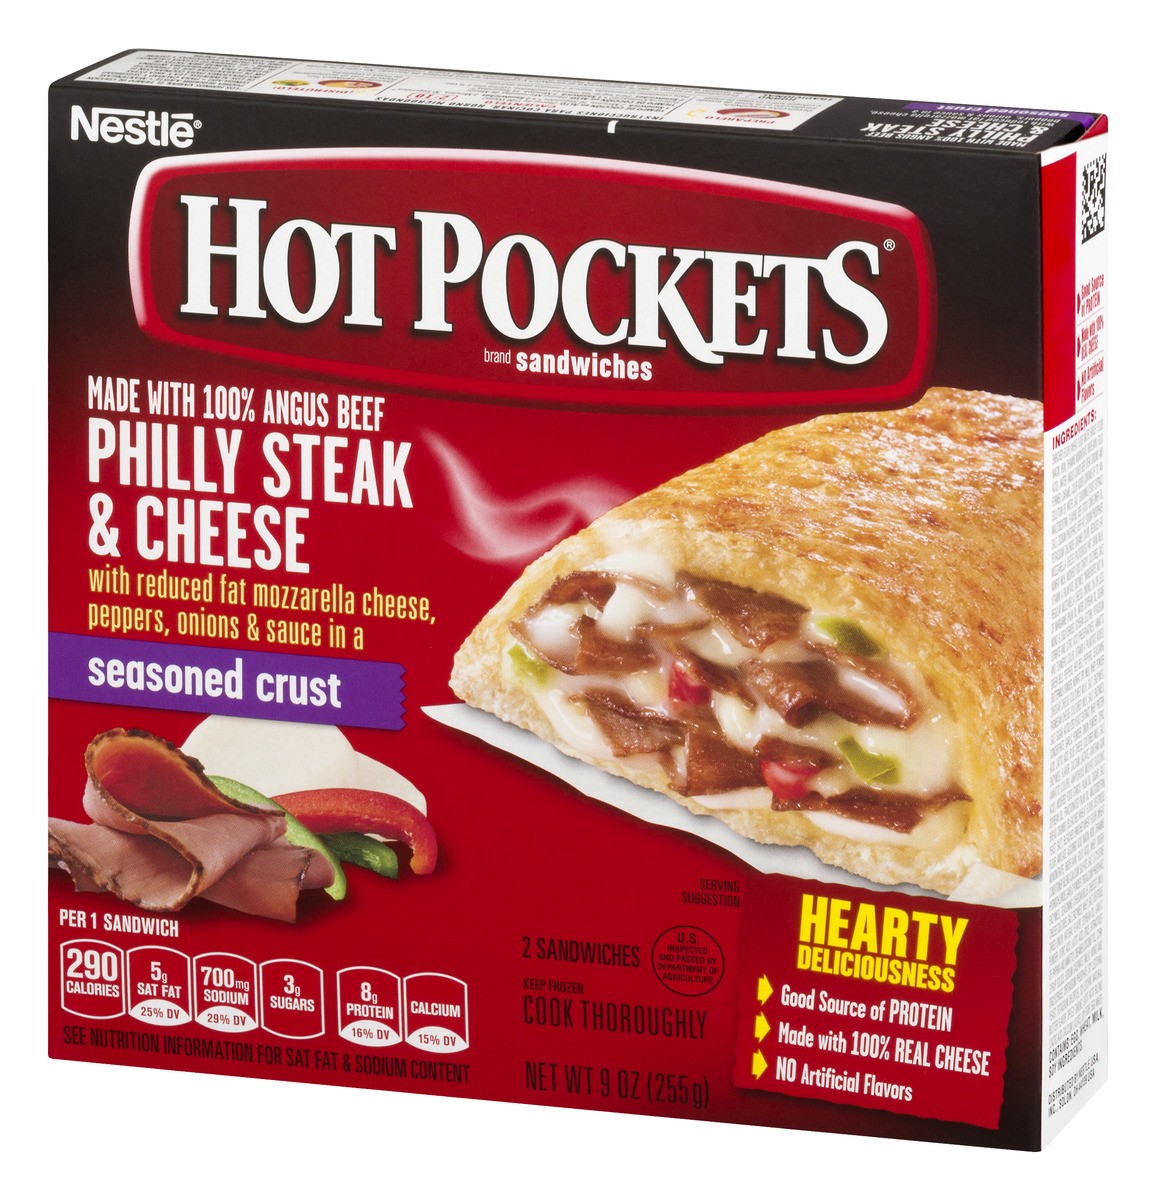 slide 3 of 9, Hot Pockets Philly Steak & Cheese Frozen Snacks in a Seasoned Crust, Philly Cheesesteak Made with Real Reduced Fat Mozzarella Cheese, 2 Count Frozen Sandwiches, 9 oz